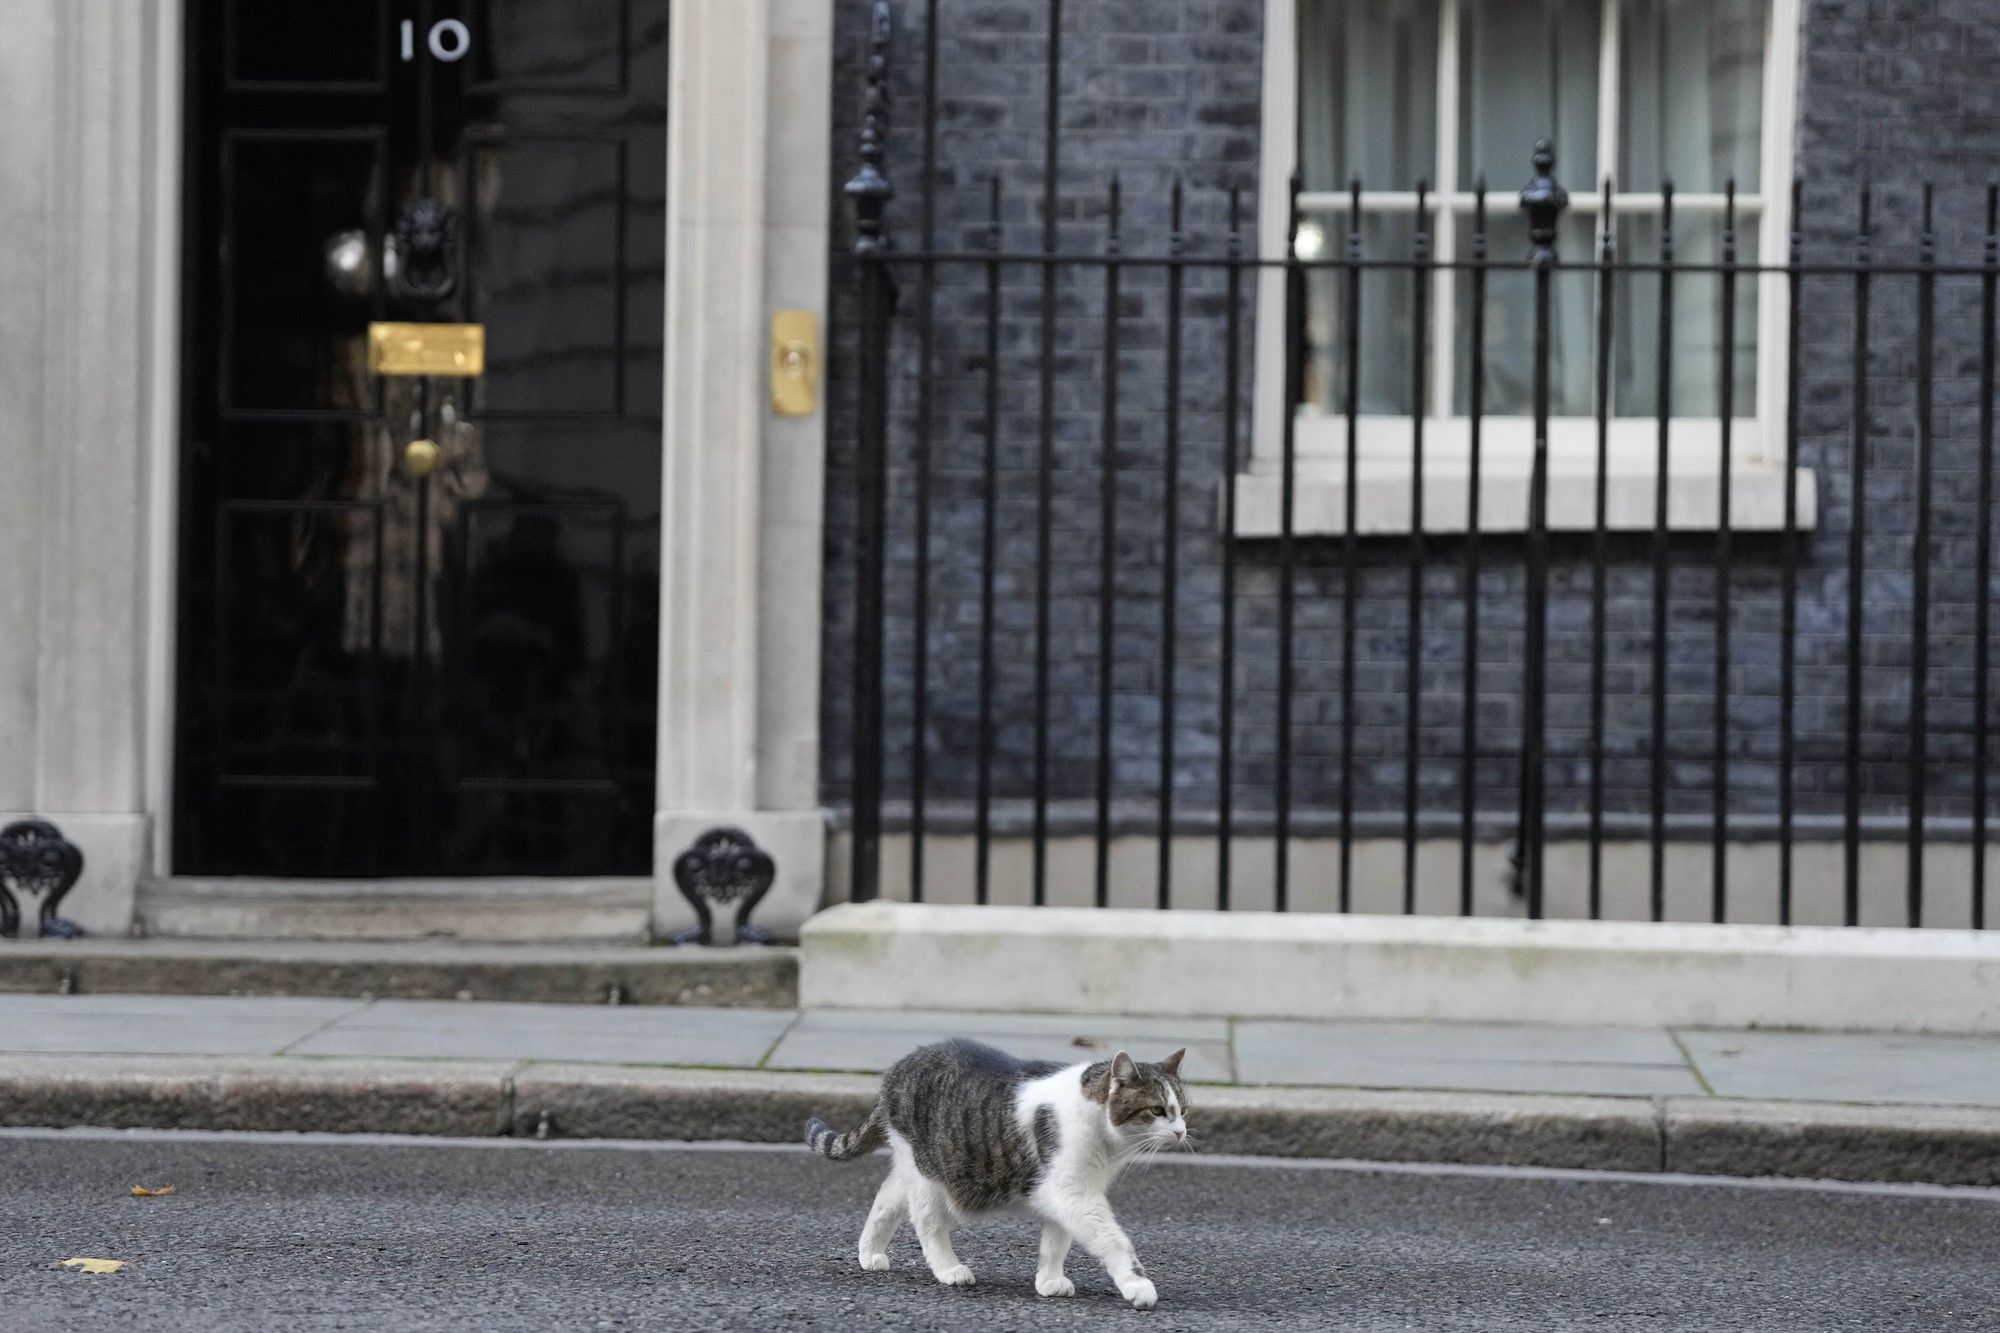 larry the cat walks across the road outside 10 downing street